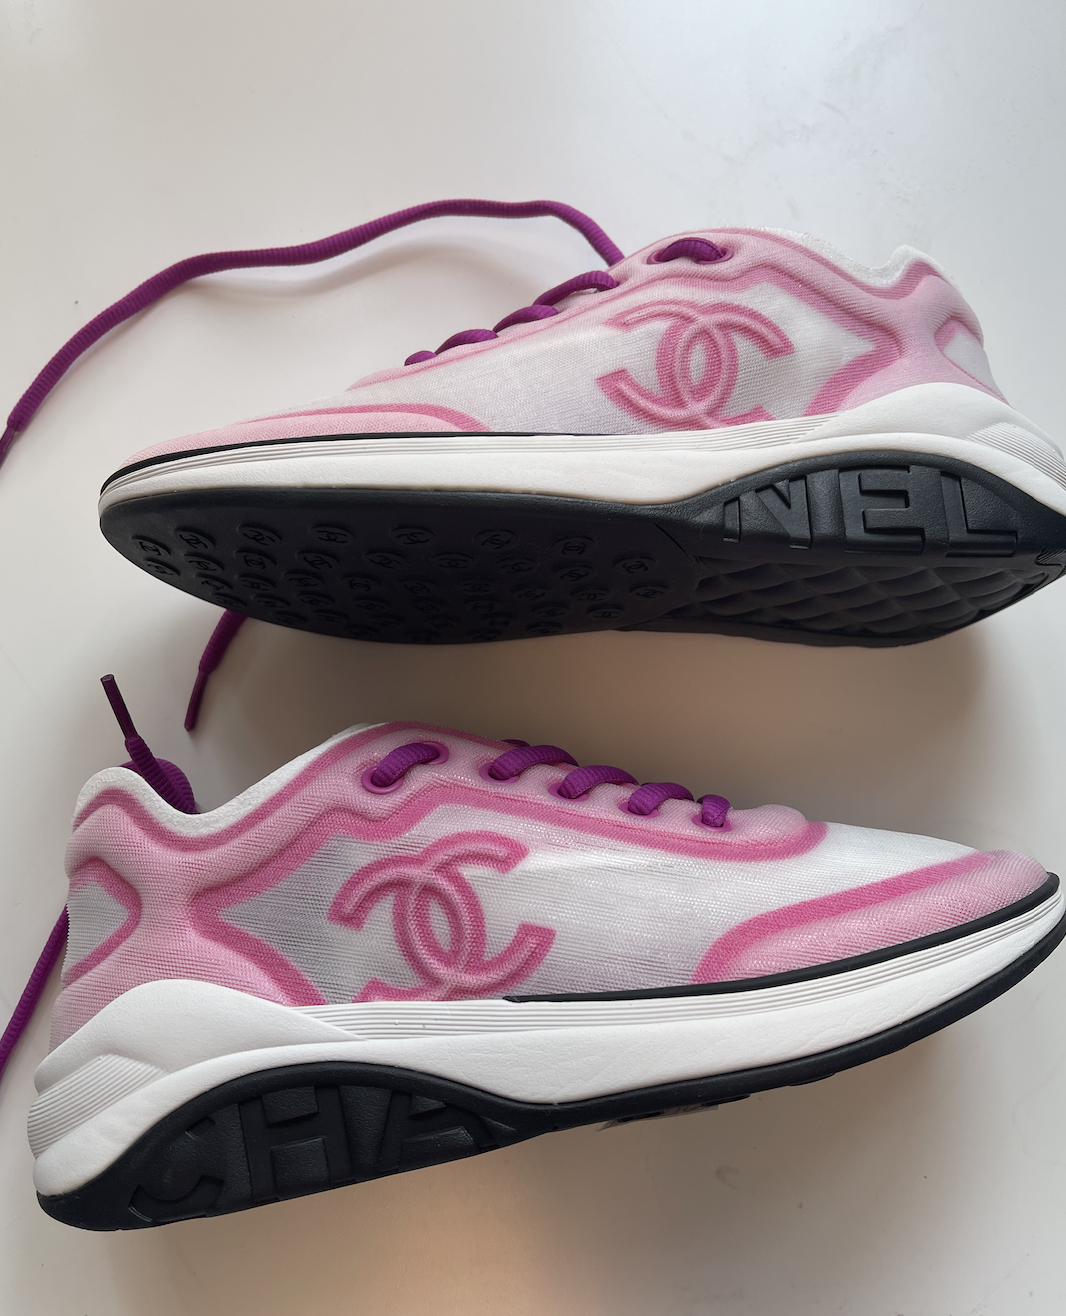 Chanel Shoes Sneakers 19P Pink/Mesh, New in Box MA001 - Julia Rose Boston